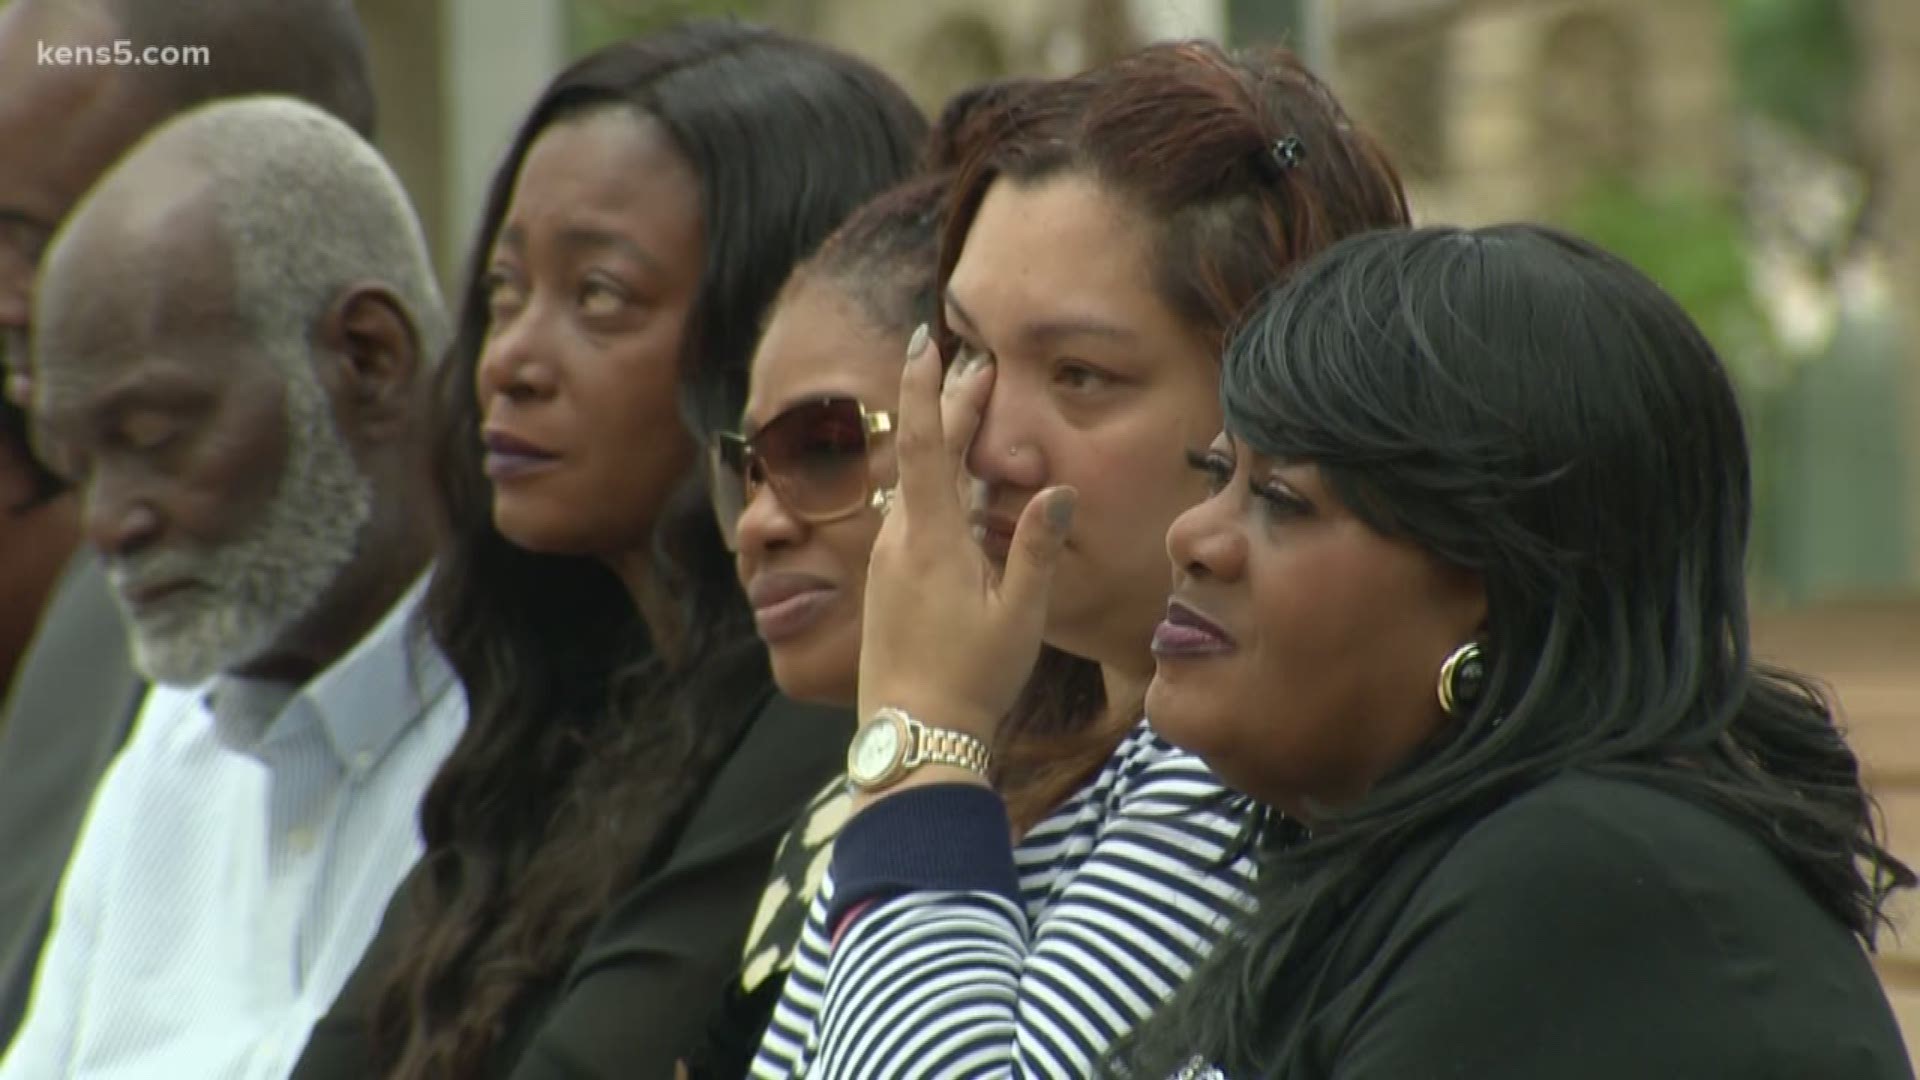 A missing mother believed to be dead was remembered tonight at a vigil. The emotional service focused on the life of Andreen McDonald as well as the fight for justice. At this hour, her husband is still in jail in connection to her disappearance.